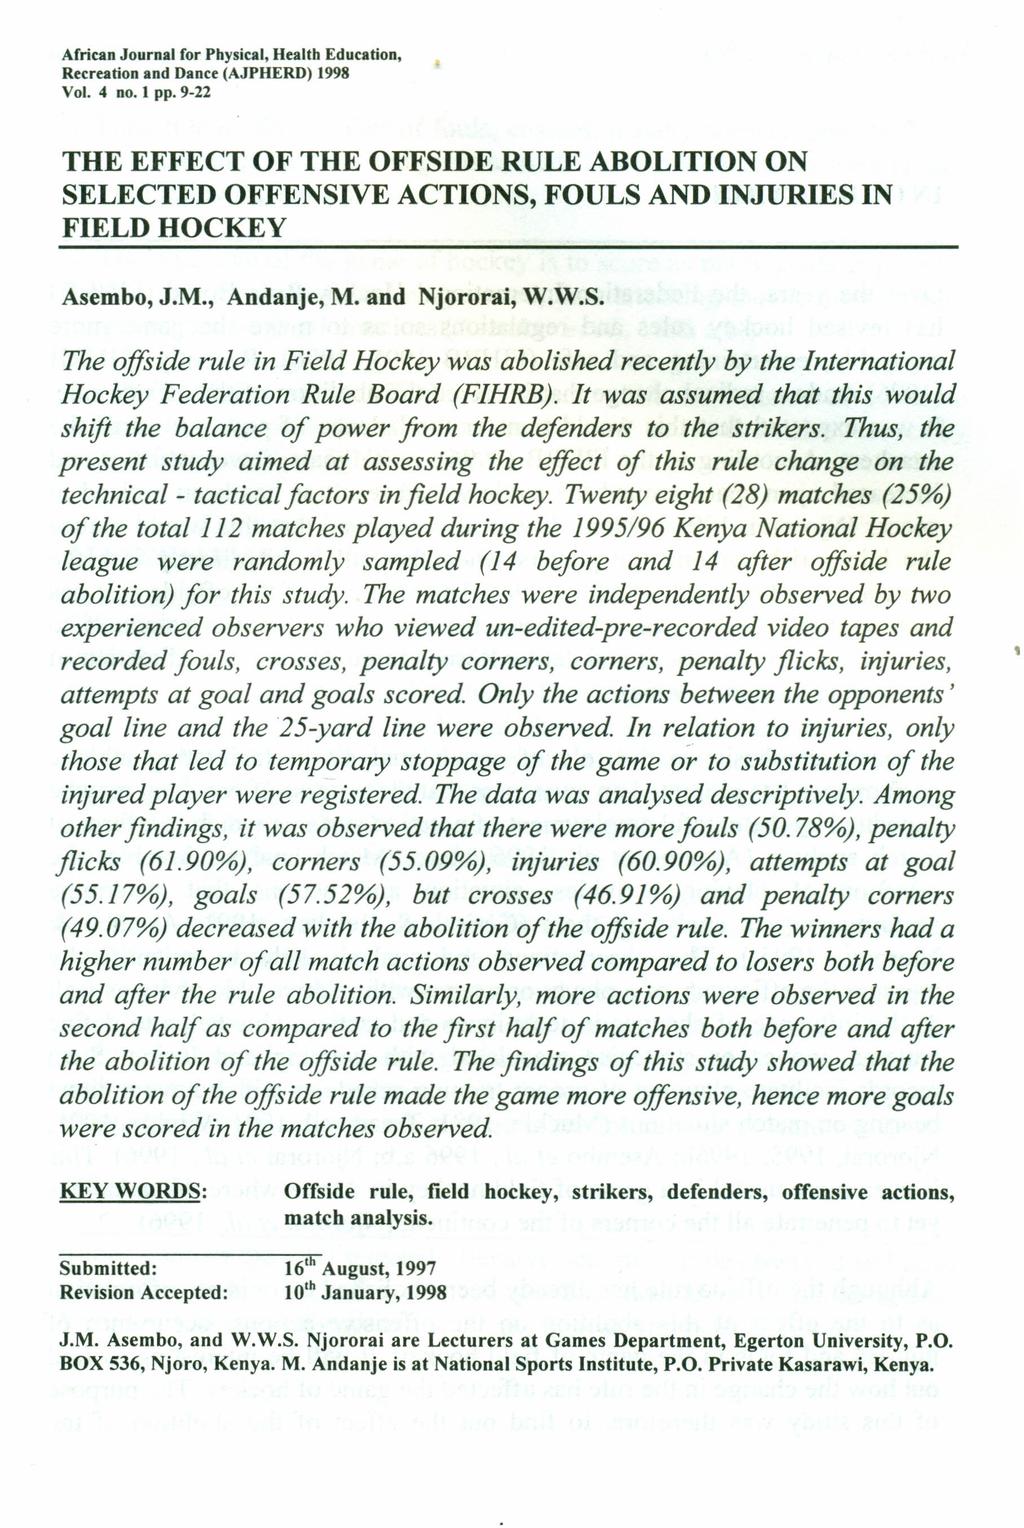 African Journal for Physical, Health Education, Recreation and Dance (AJPHERD) 1998 Vol. 4 no. I pp.